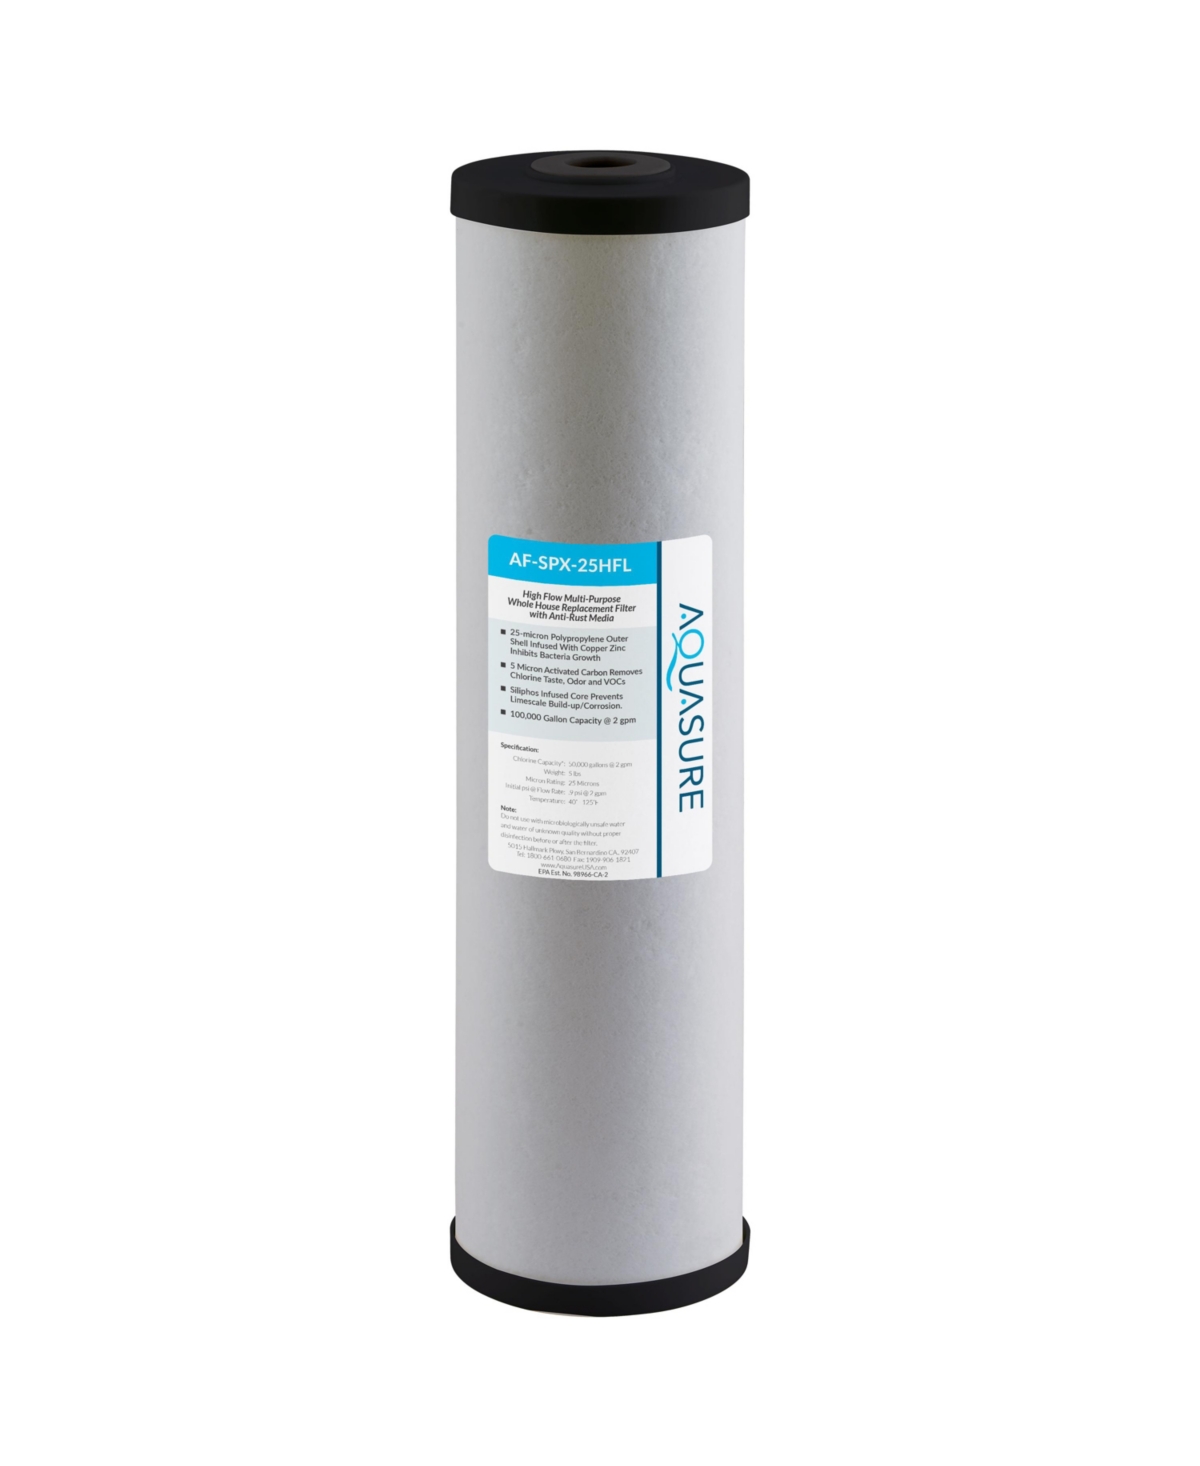 Fortitude V2 Multi-Purpose Replacement Filter Cartridge with Siliphos - Large Size - Grey